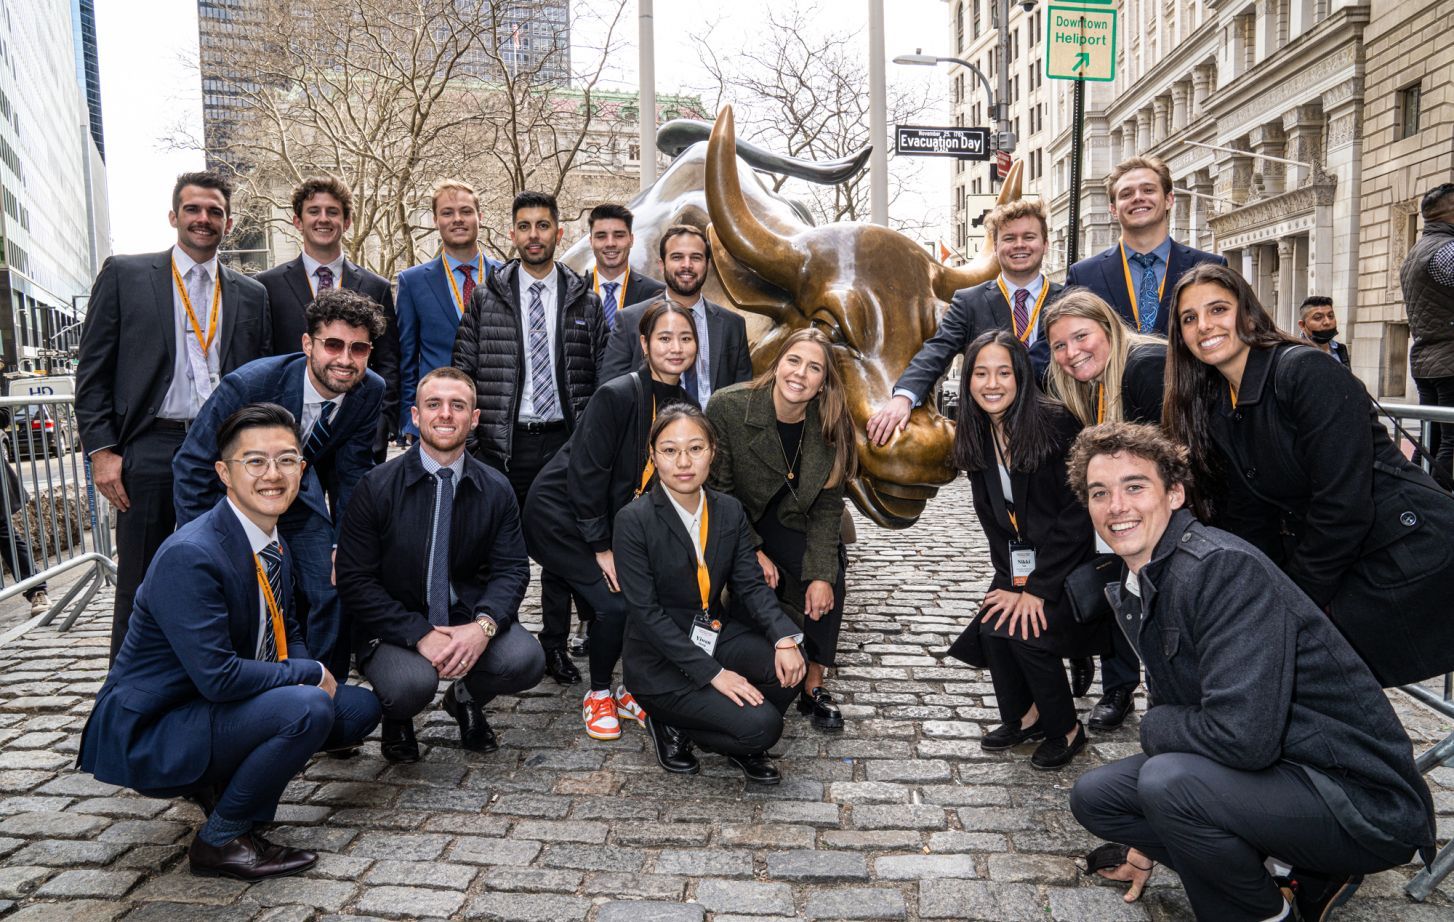 students stand next to the bull of Wall Street statue